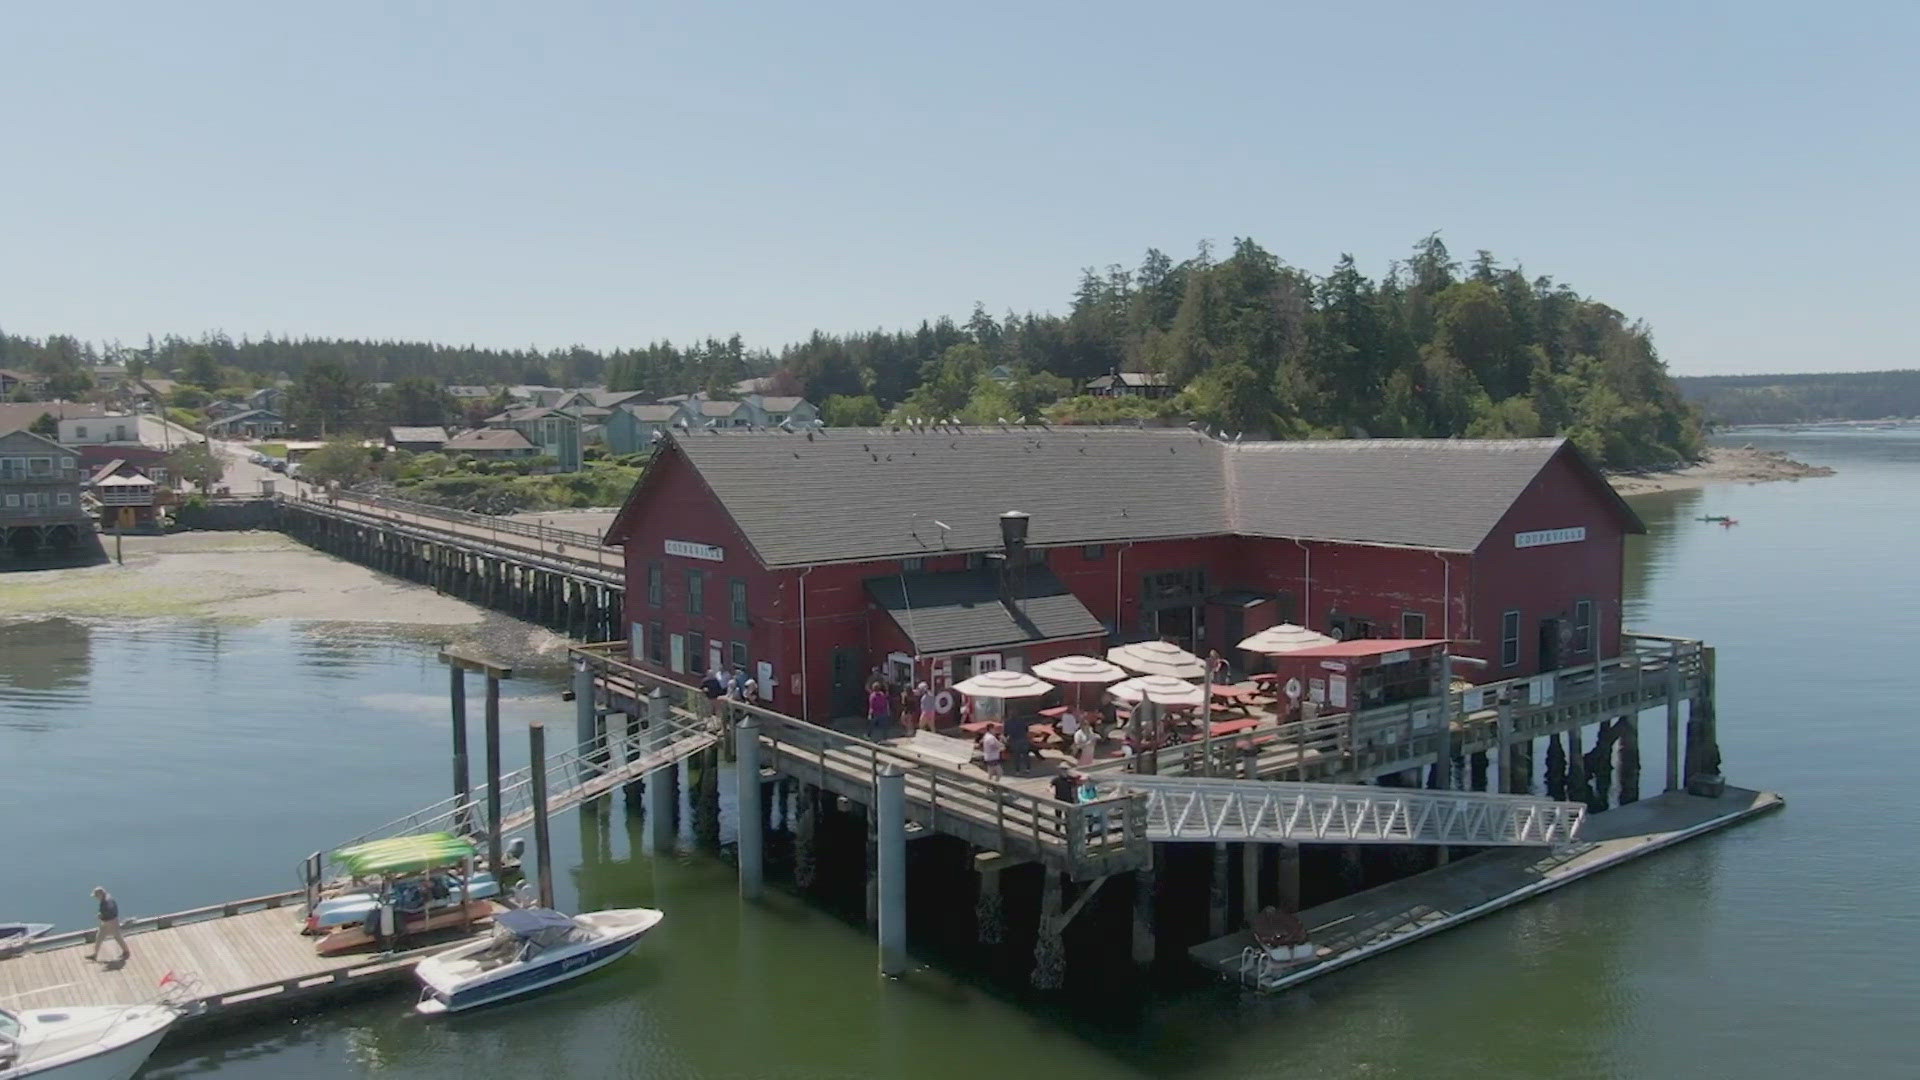 The iconic Coupeville Wharf is 119 years old. It has now been put on a "most endangered places" list.